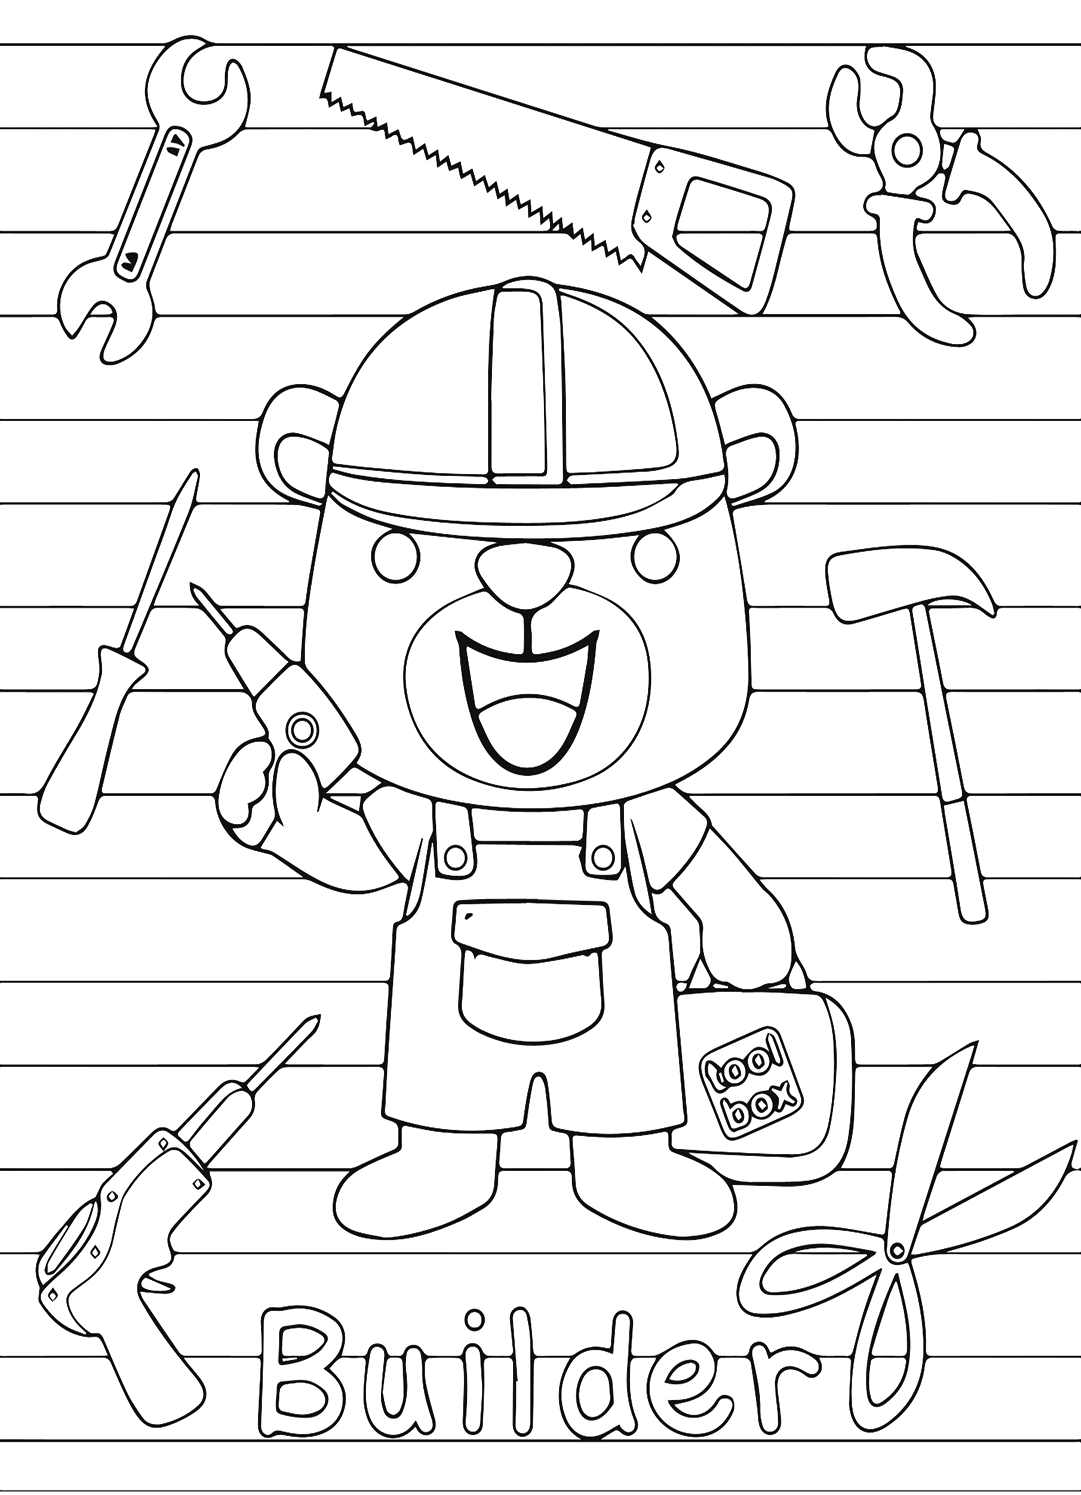 Bear and Toolbox Coloring Pages